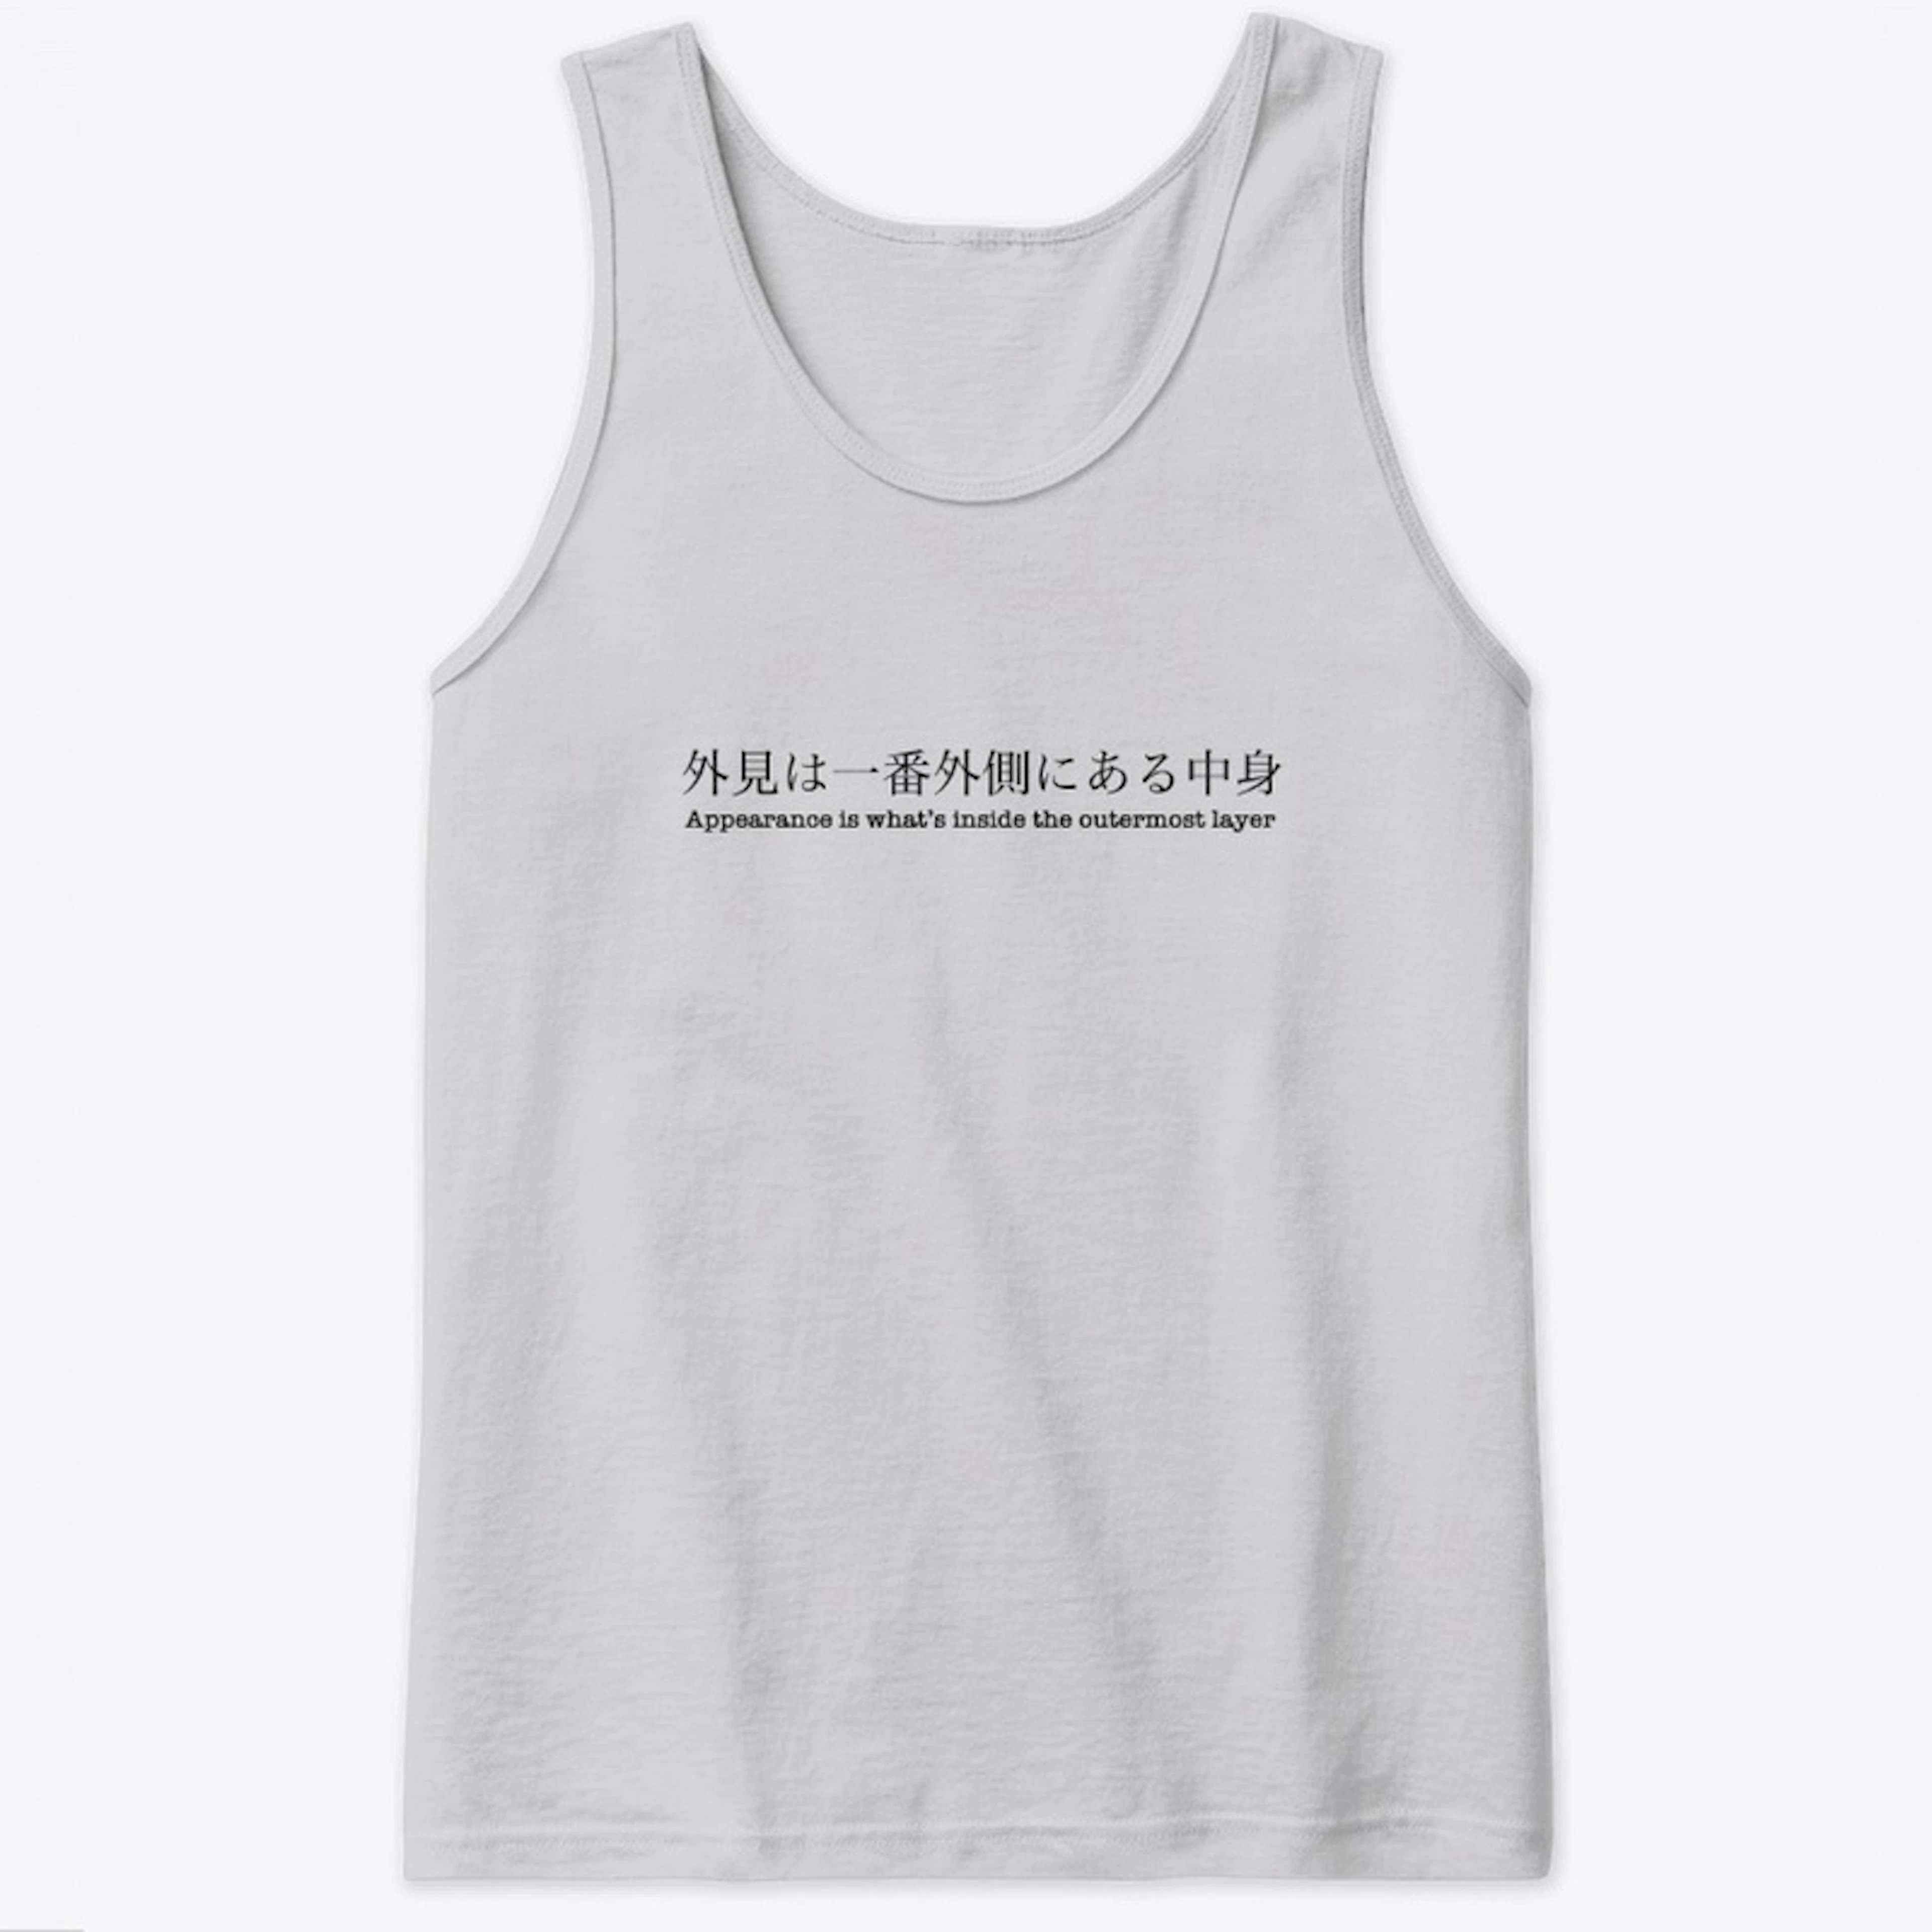 Japanese quote T-shirt